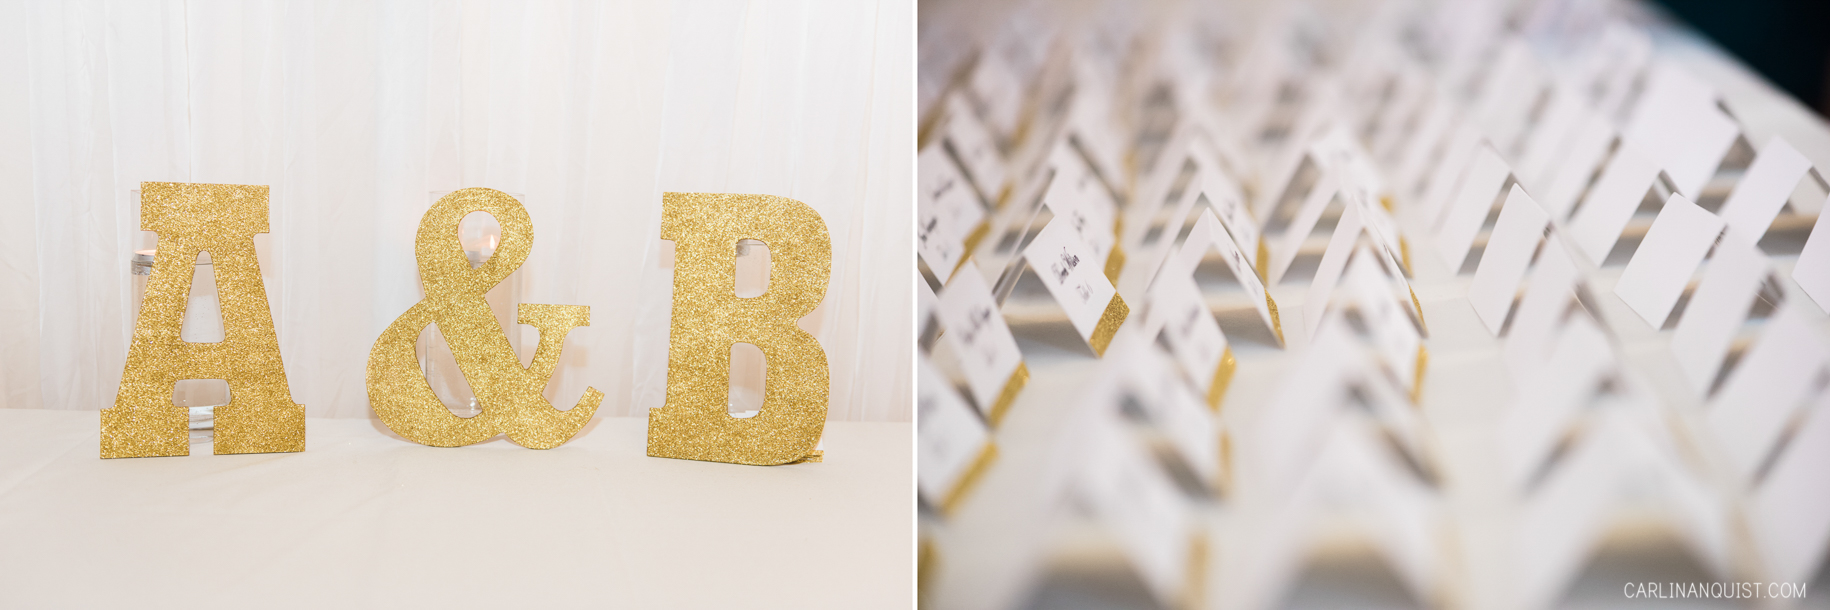 Reception Place Cards | Canmore Wedding Photographer